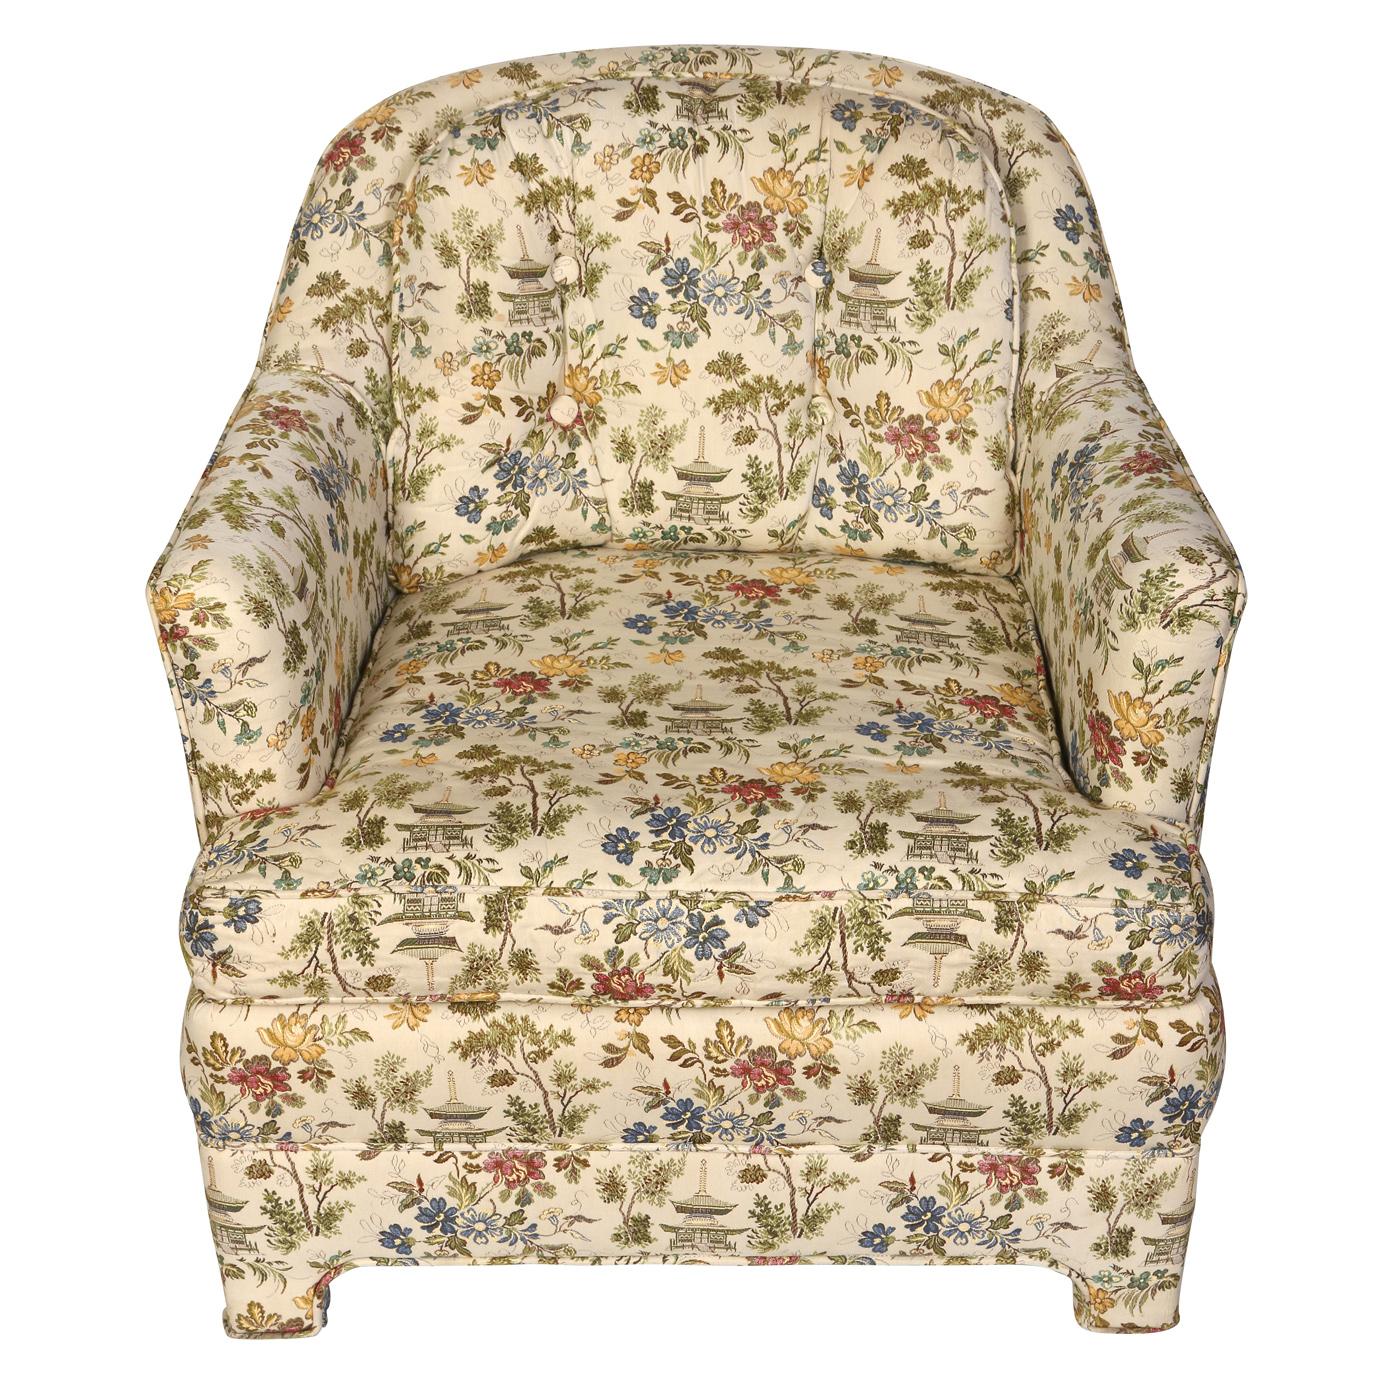 A pair of vintage upholstered club chairs with great lines and proportion.  The chairs, covered in a floral with a Chinoiserie motif, feature loose seat and back cushions, sloped arms and chic upholstered legs.  Their compact shape and size make